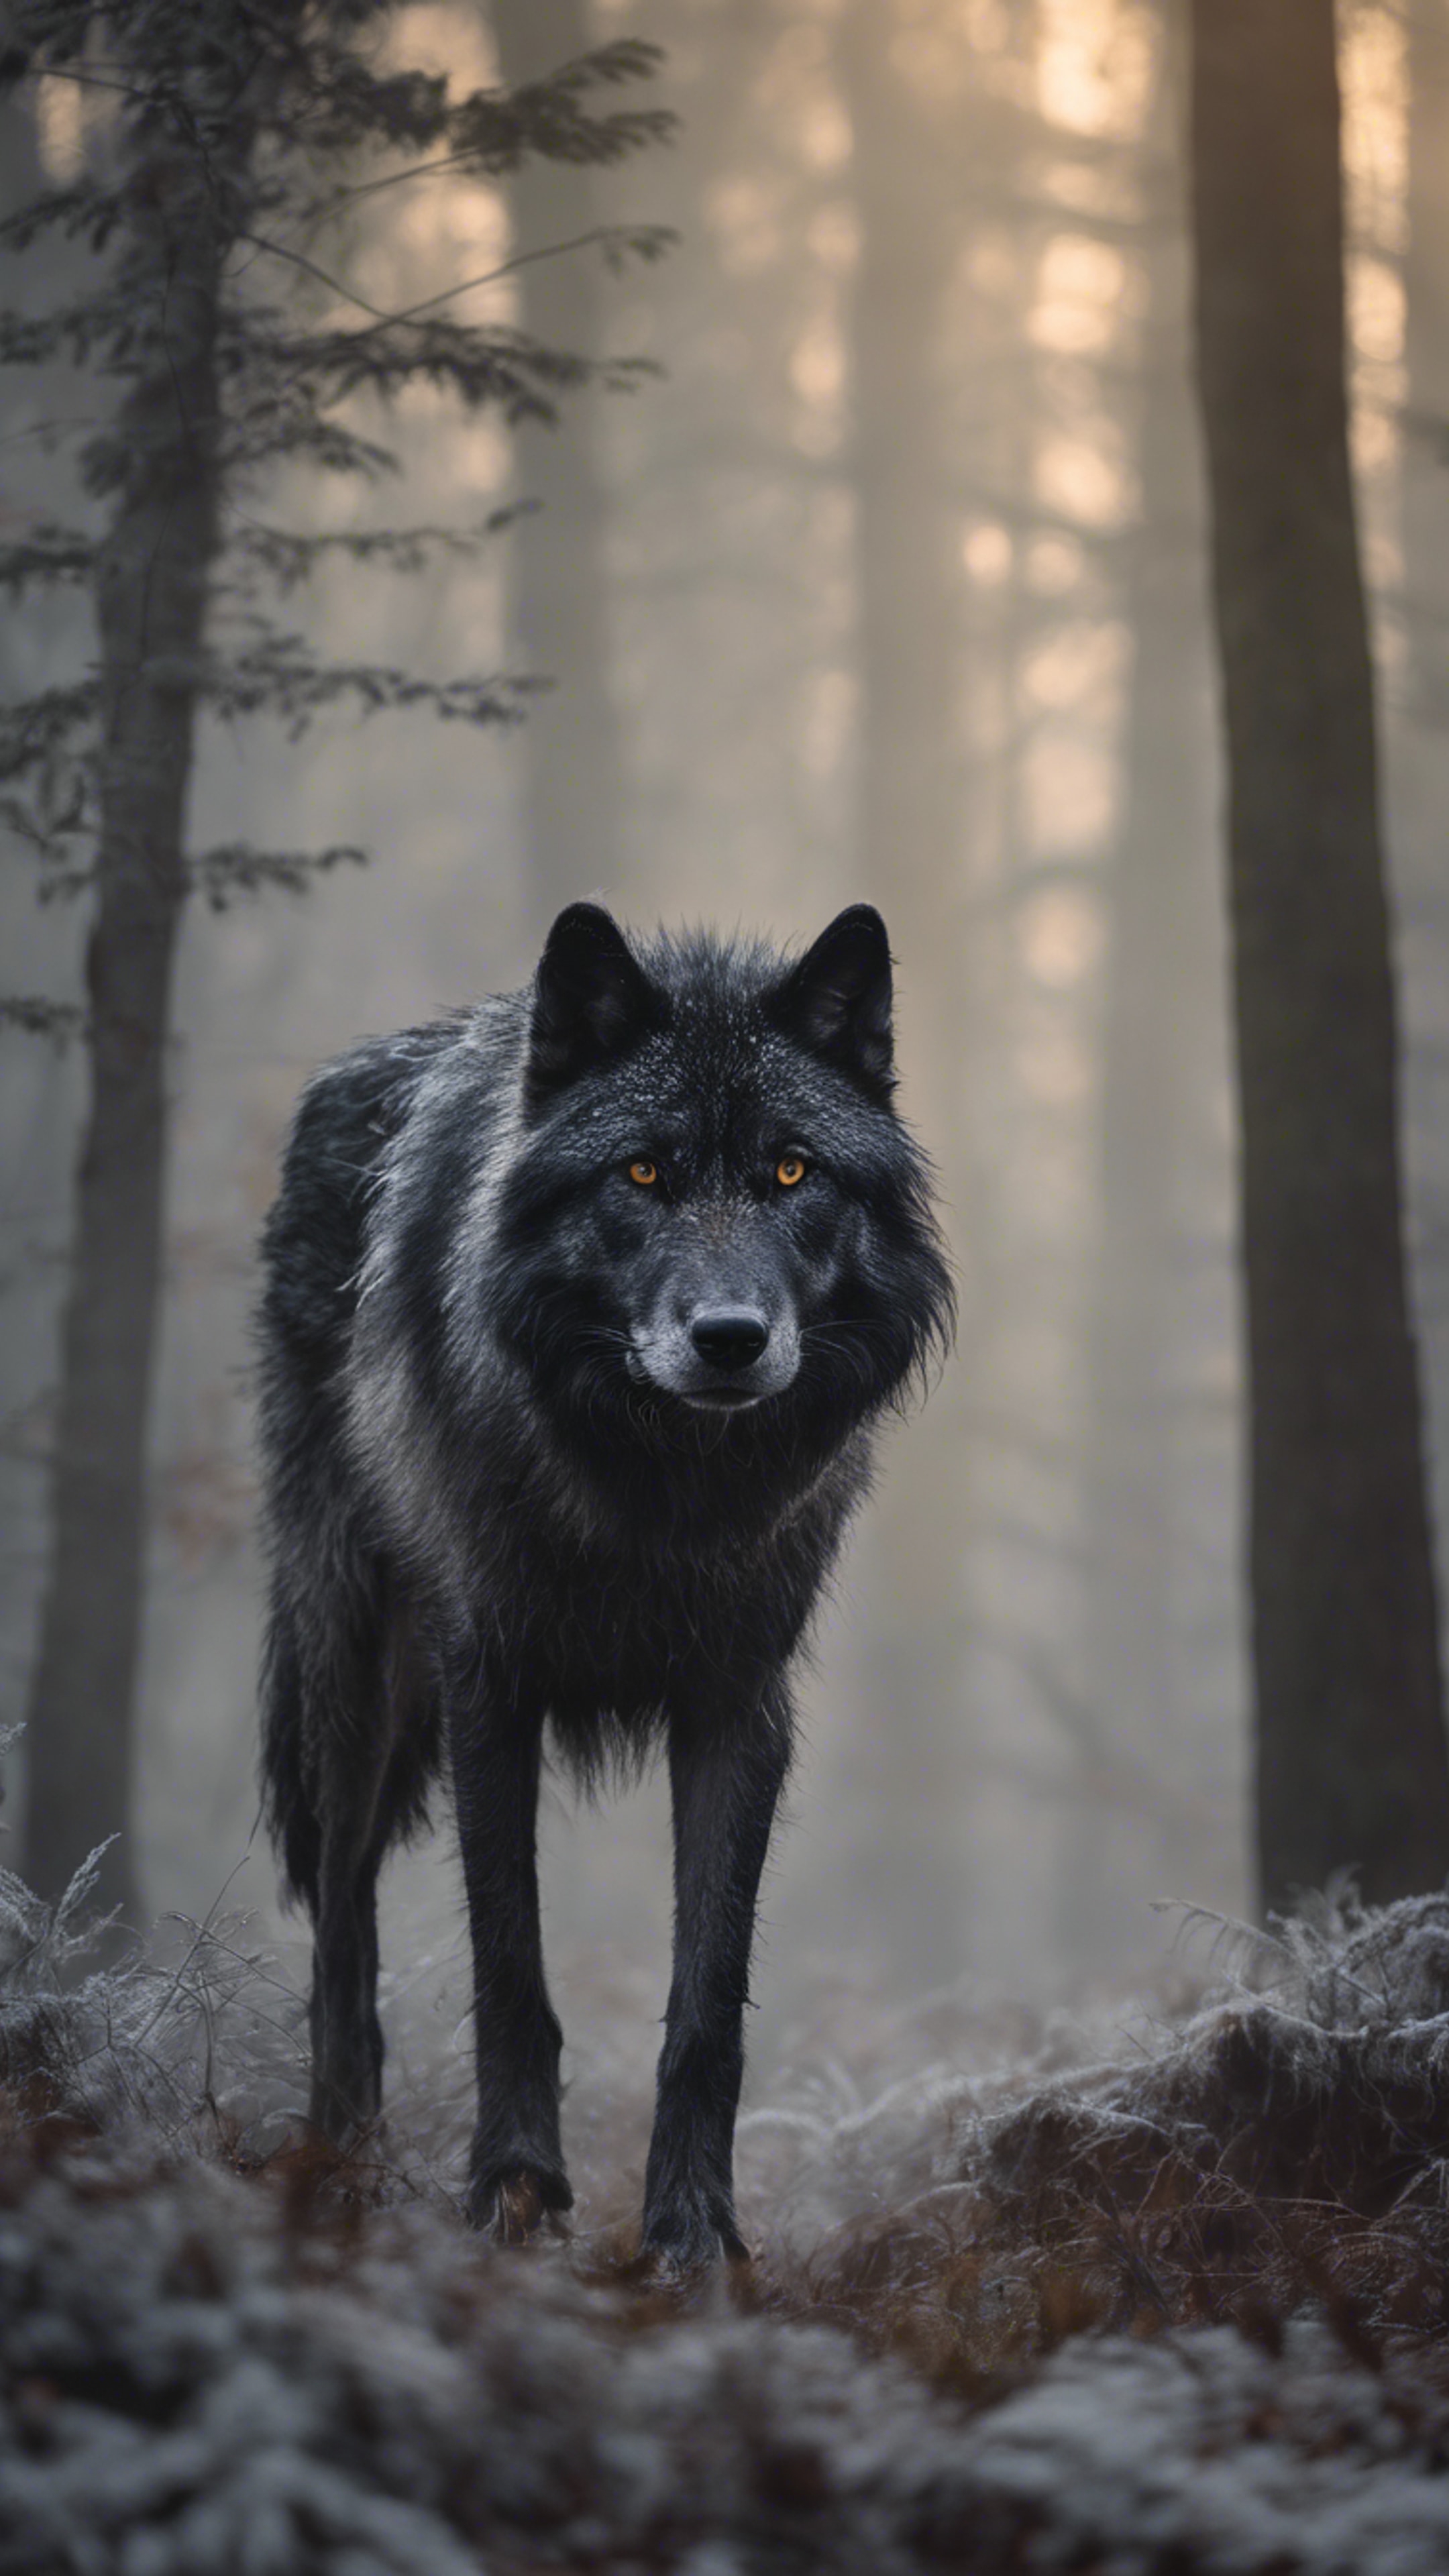 A cool black and gray shaggy wolf prowling through a mist-filled forest at dawn. Wallpaper[e0adfa1209b347ac9a7e]